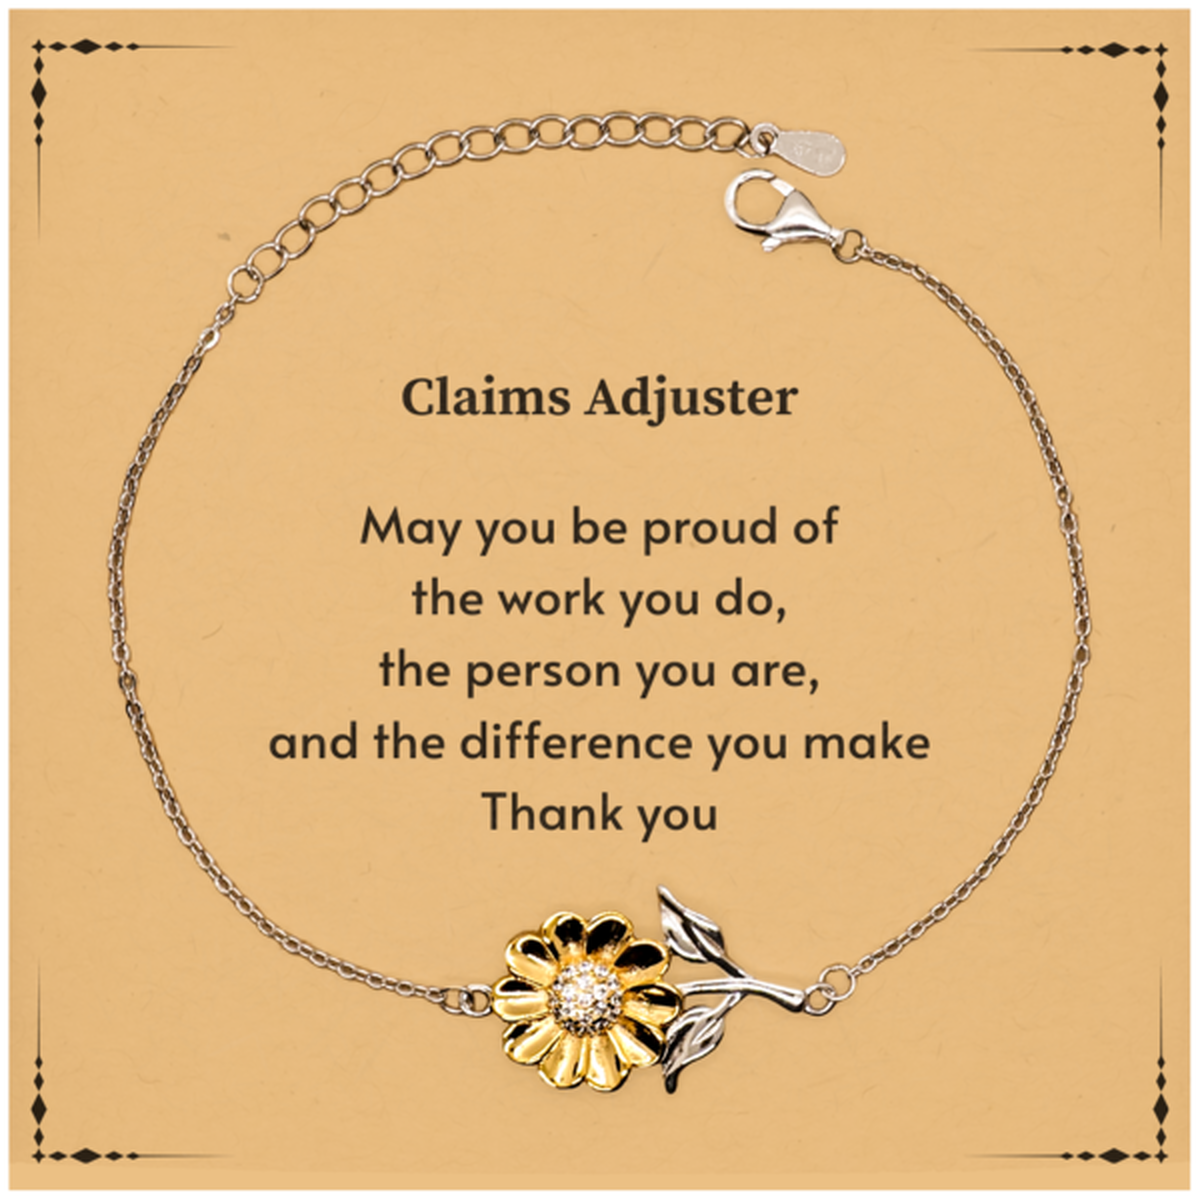 Heartwarming Sunflower Bracelet Retirement Coworkers Gifts for Claims Adjuster, Claims Adjuster May You be proud of the work you do, the person you are Gifts for Boss Men Women Friends